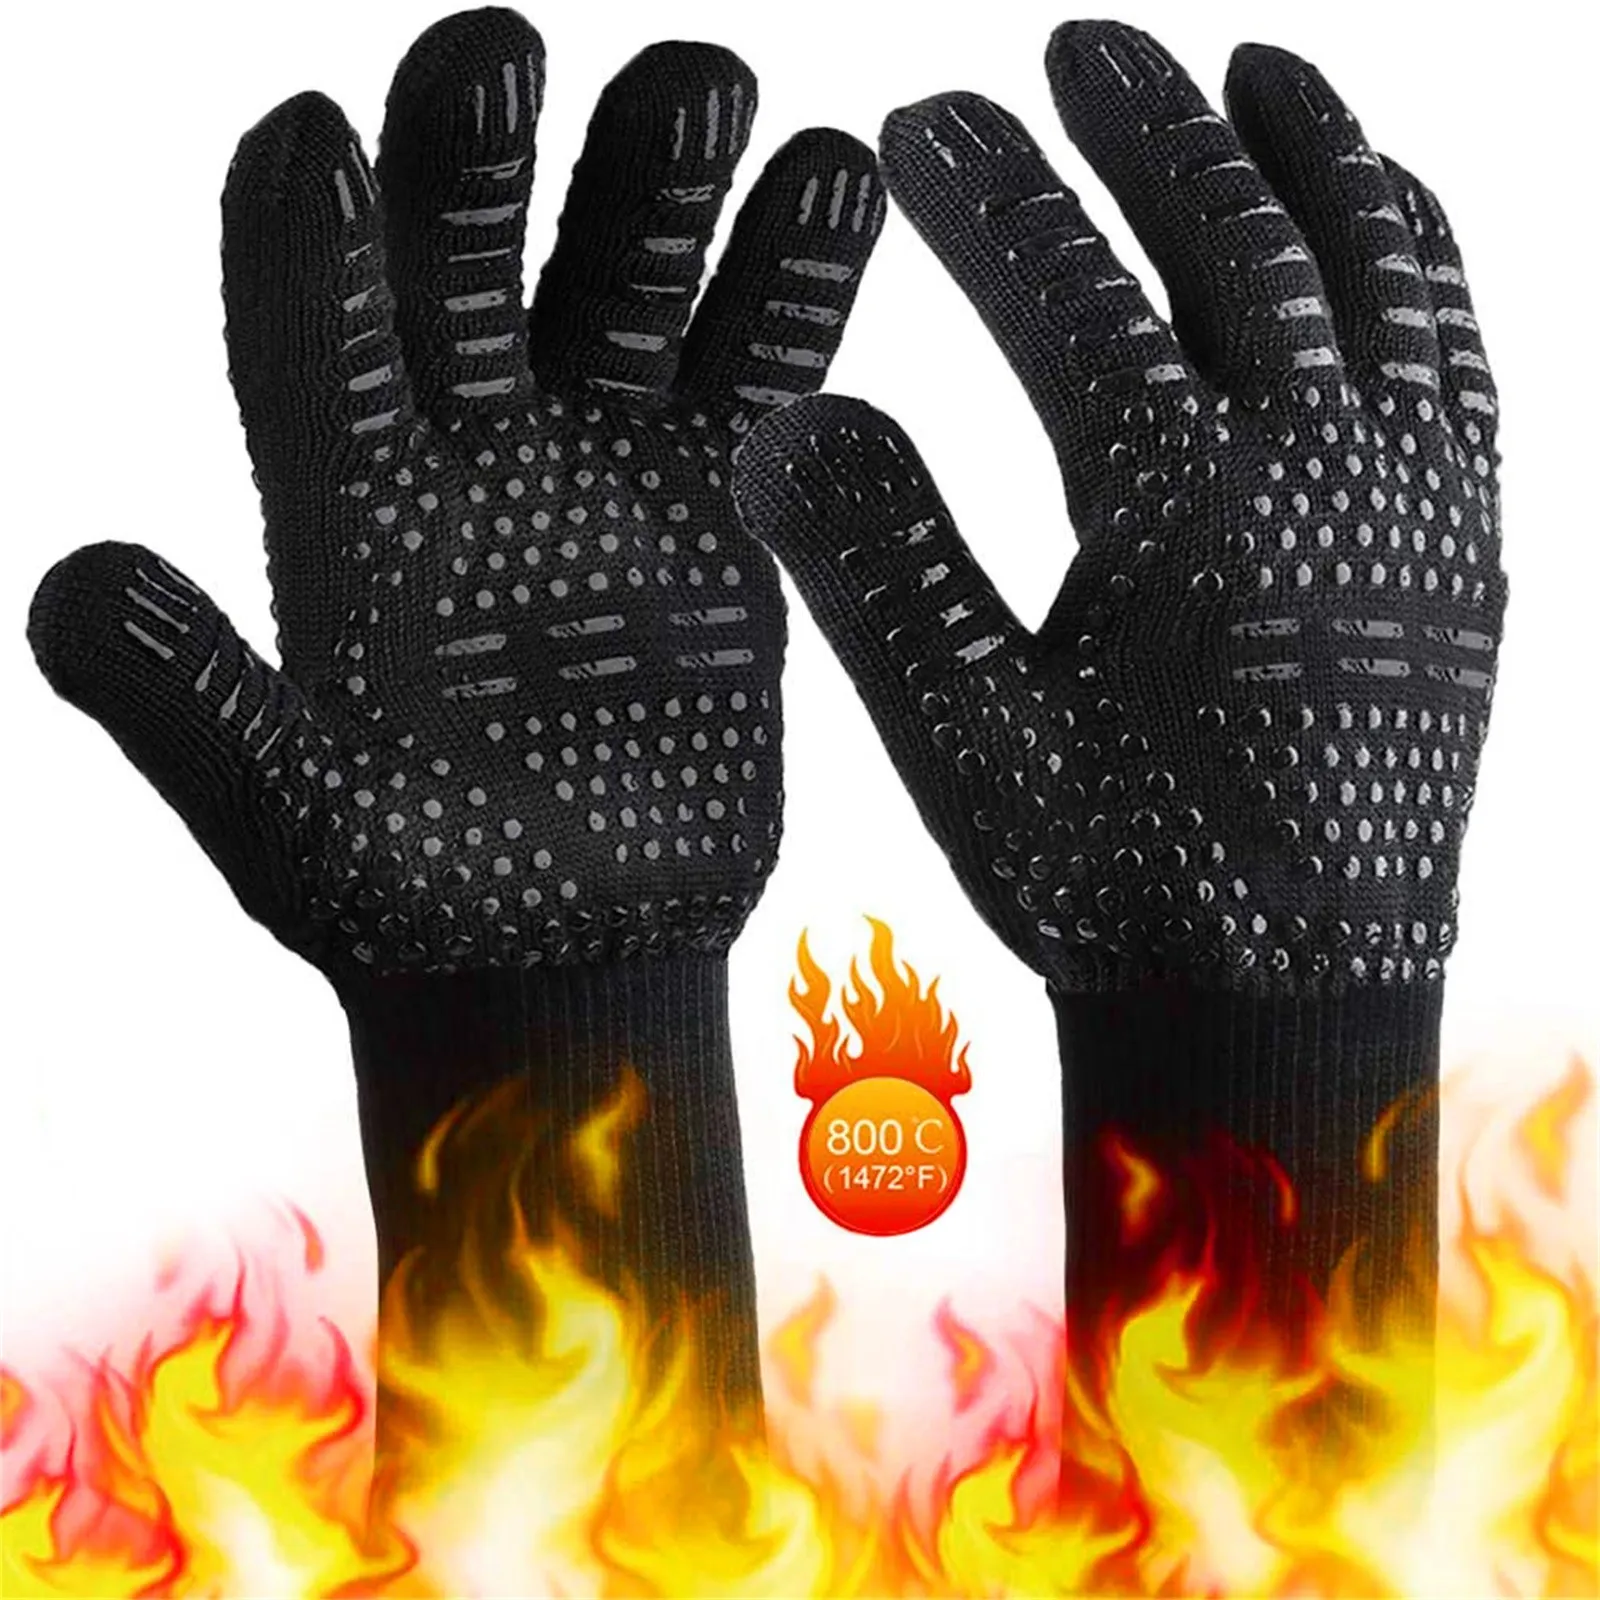 Hot SALE BBQ Grilling Cooking Gloves Extreme Heat Resistant Oven Welding Gloves